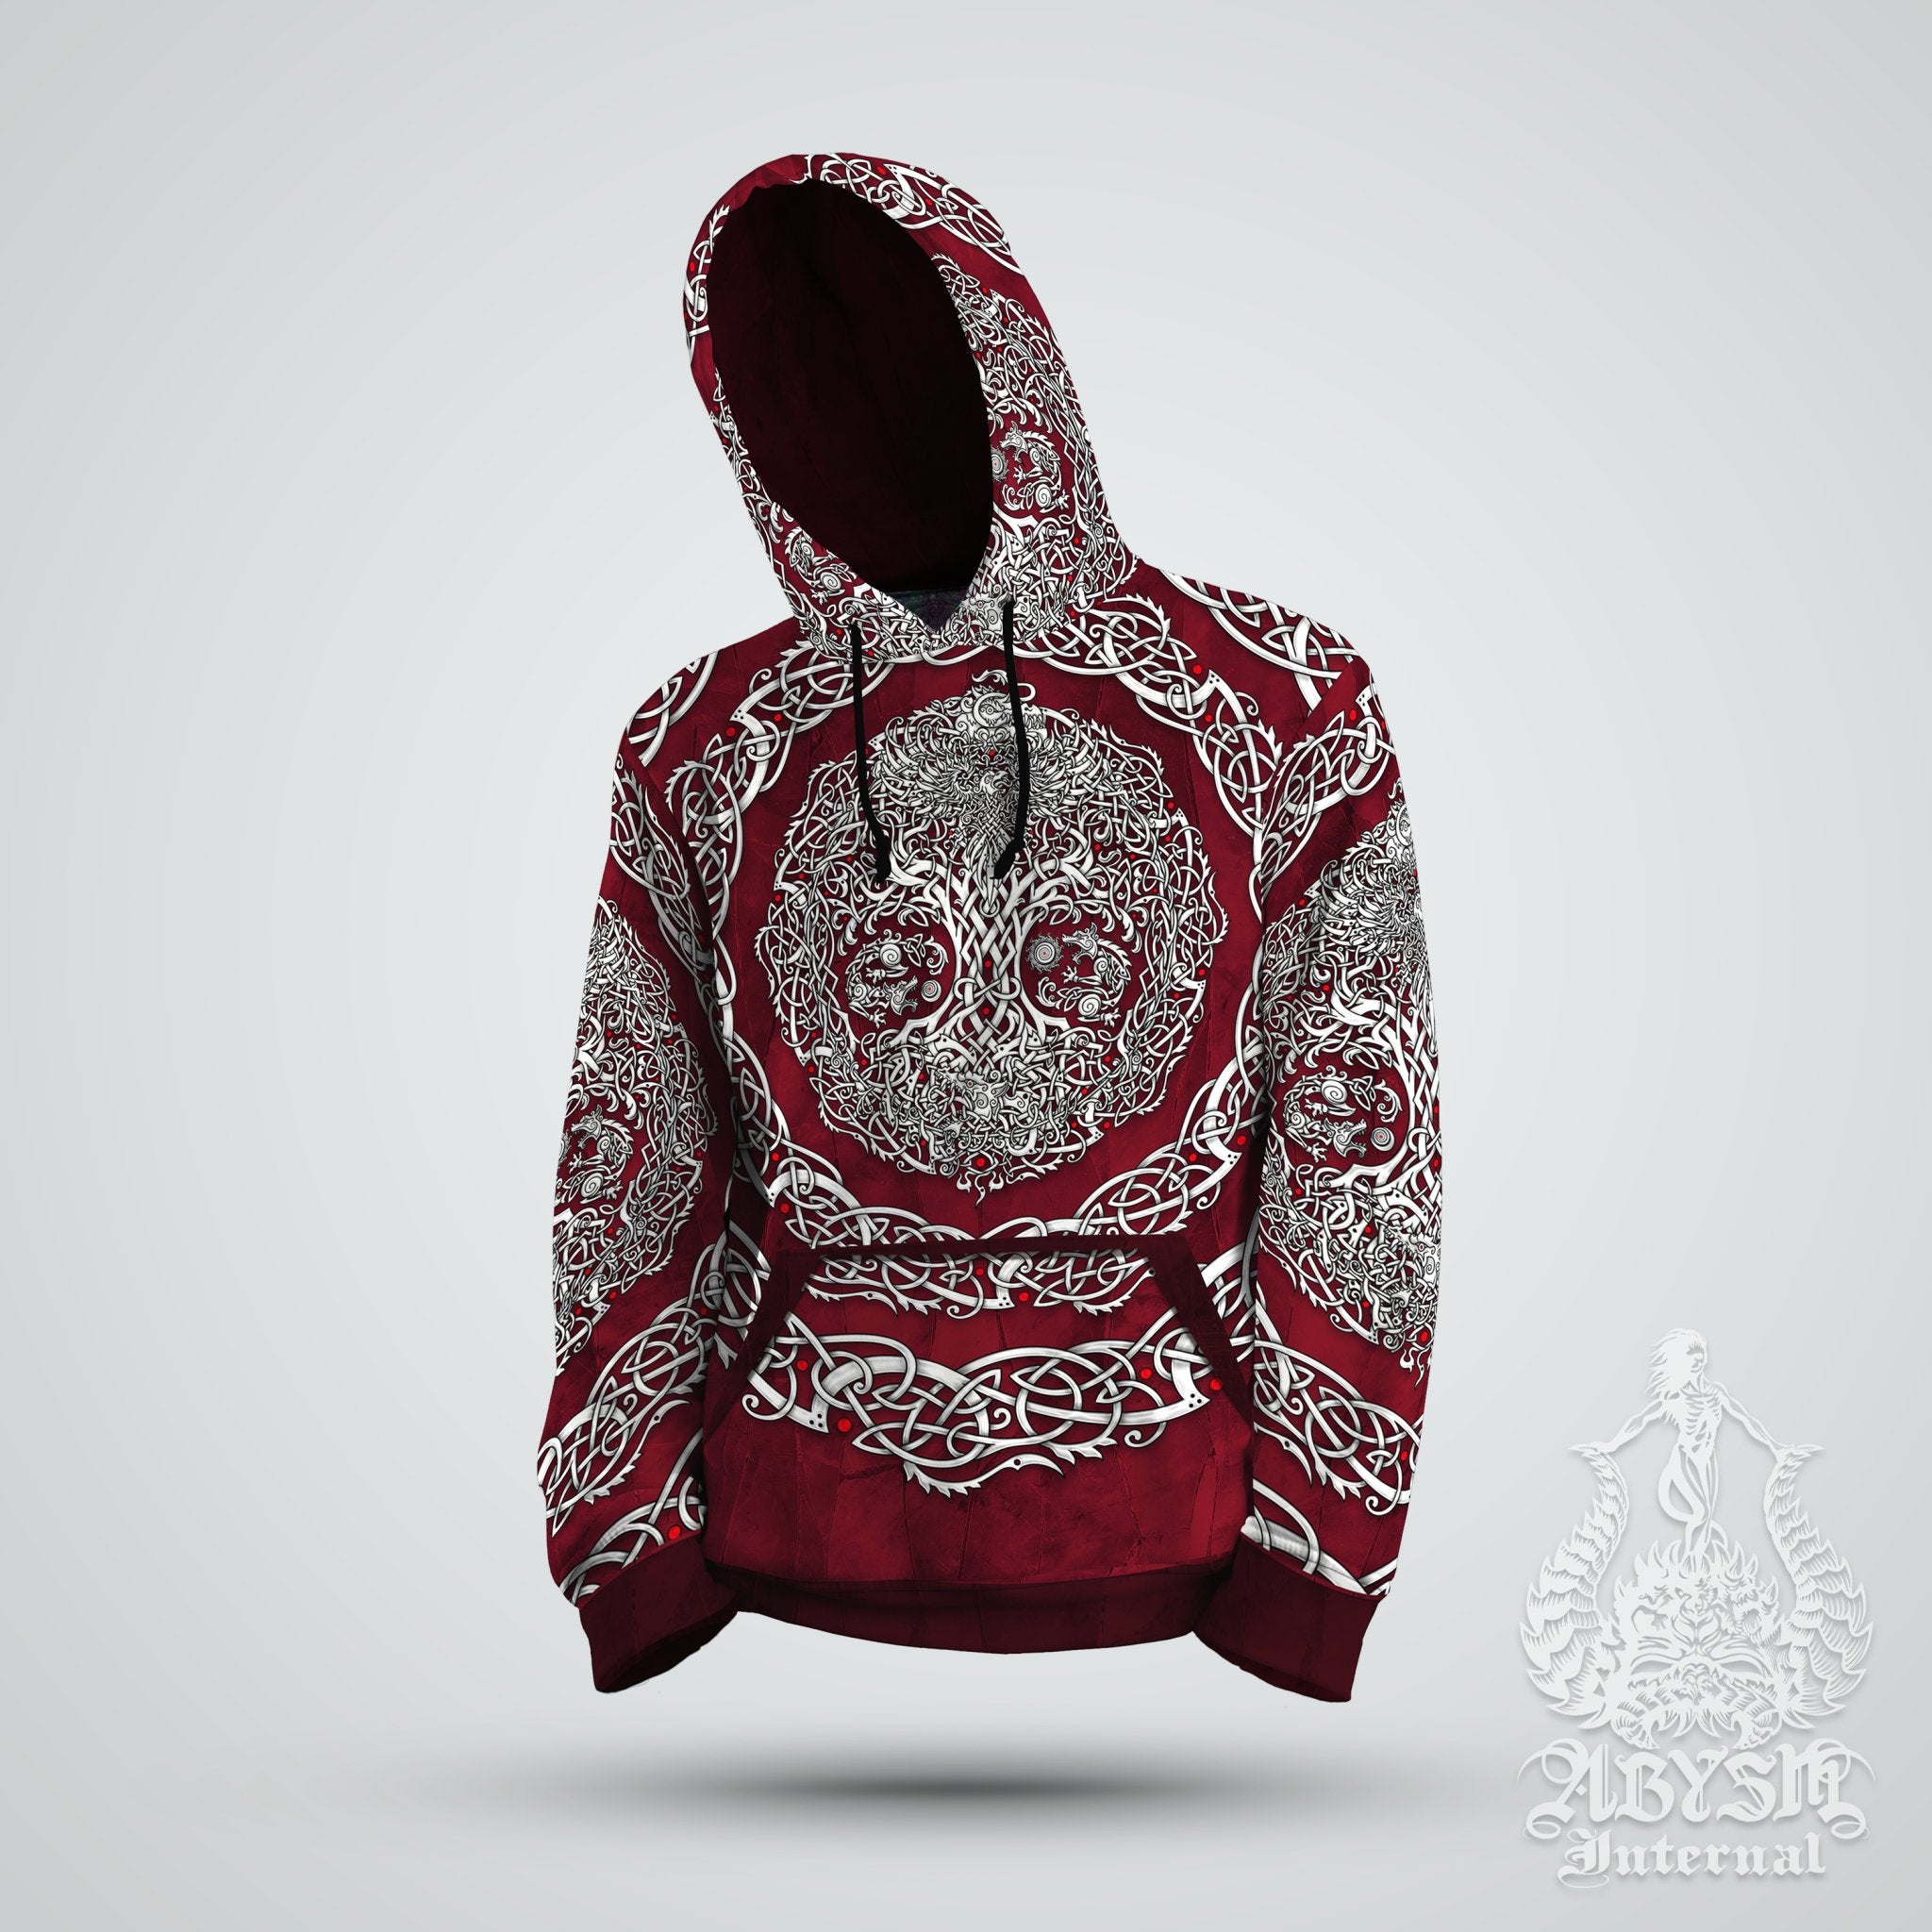 Yggdrasil Sweater, Viking Hoodie, Norse Street Outfit, Tree of Life Streetwear, Alternative Clothing, Unisex - White and Black, Blue or Red, 3 Colors - Abysm Internal